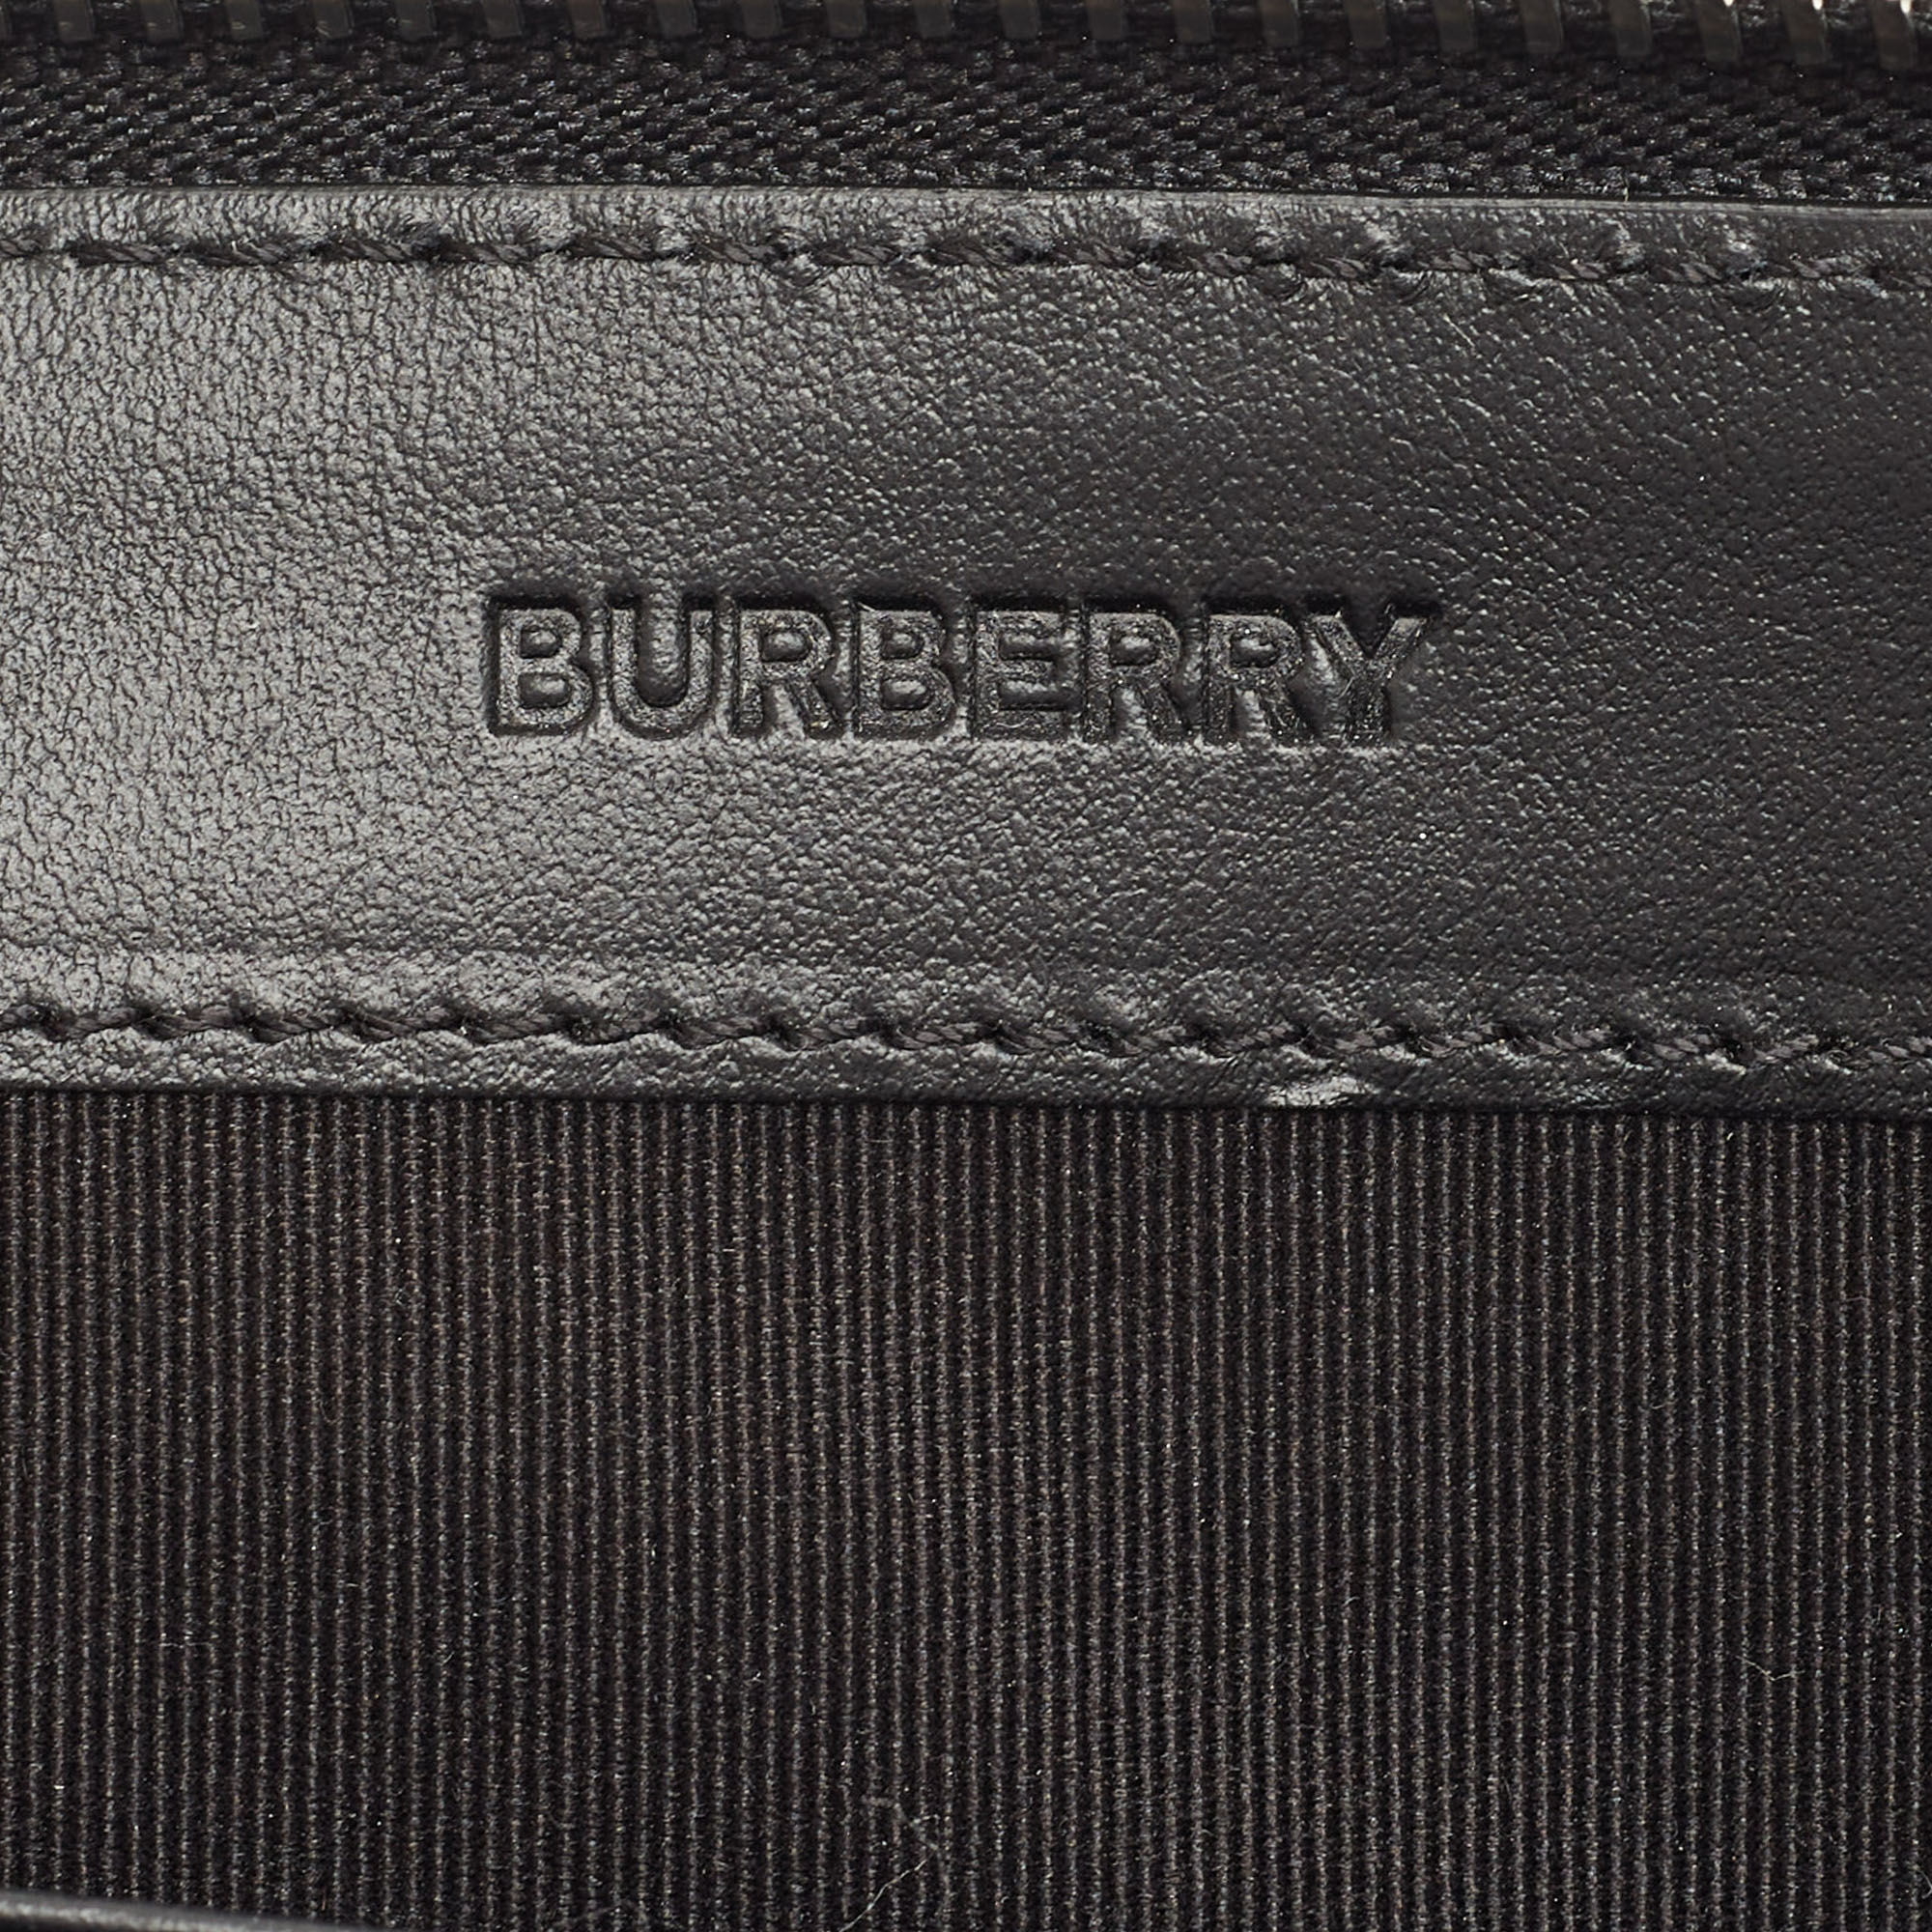 Burberry Black Printed Leather Edin Pouch